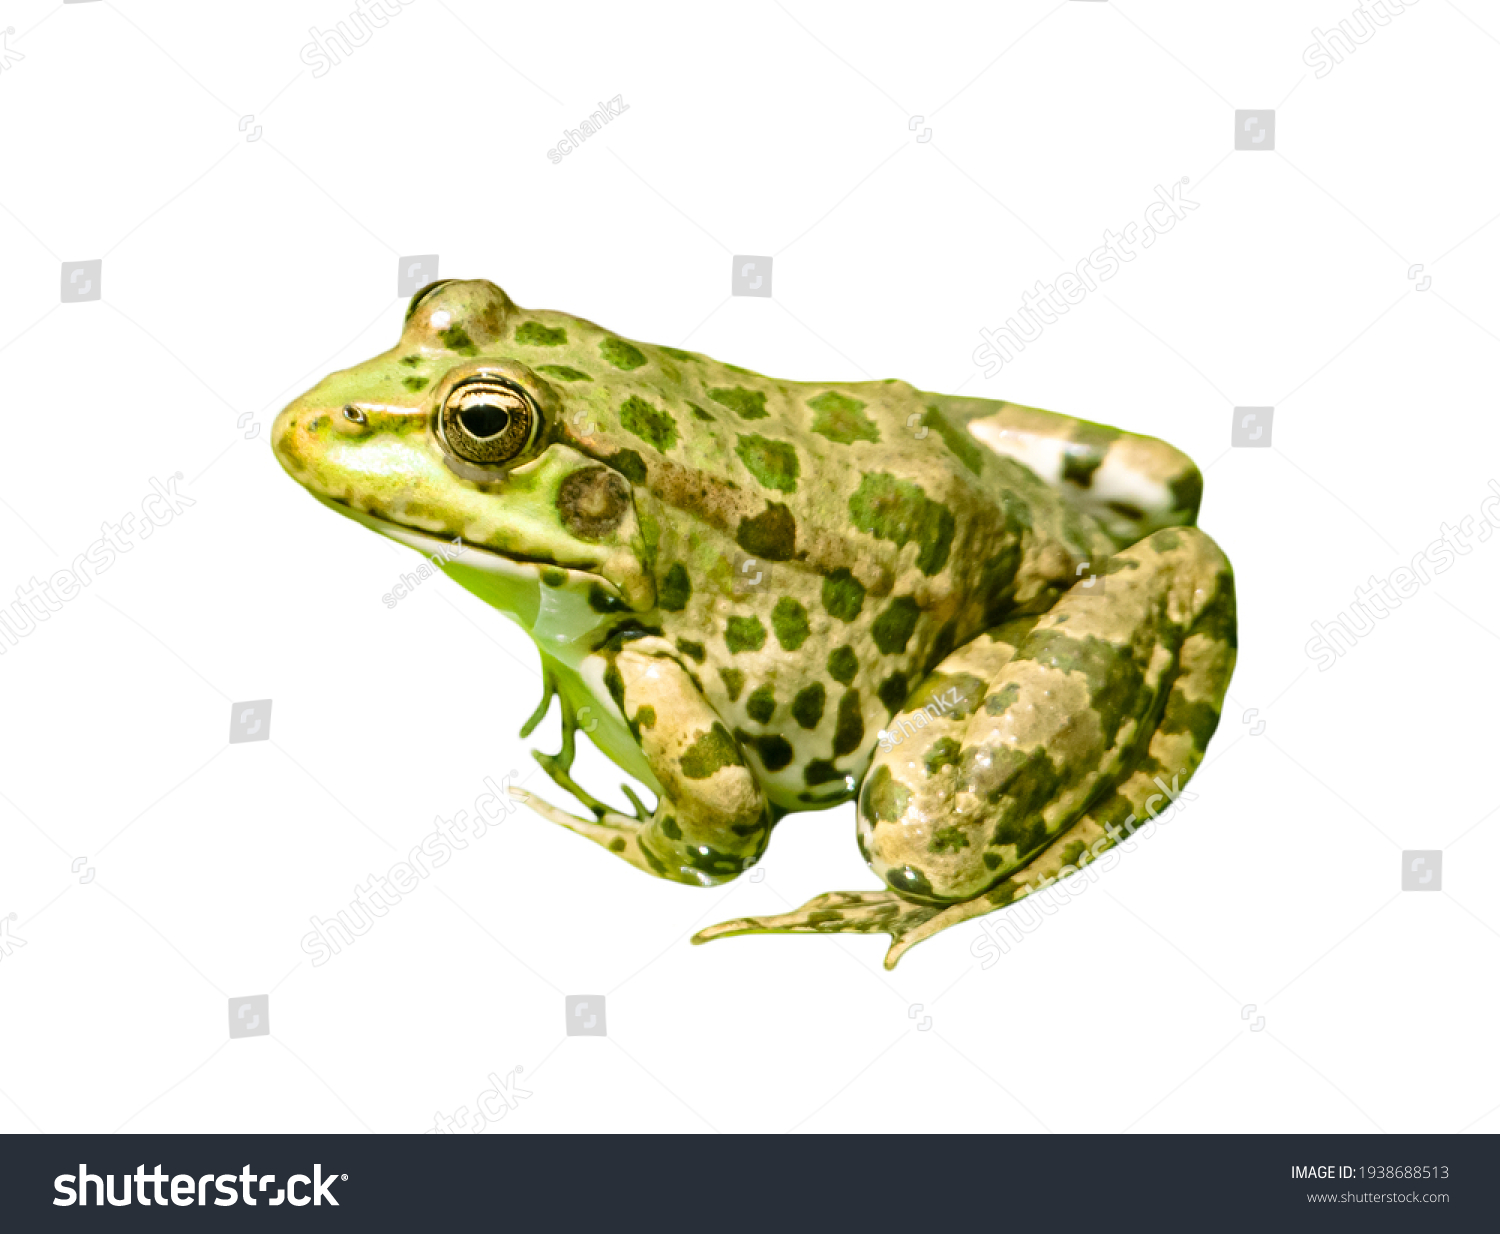 Green frog isolated on a white background. Close-up #1938688513